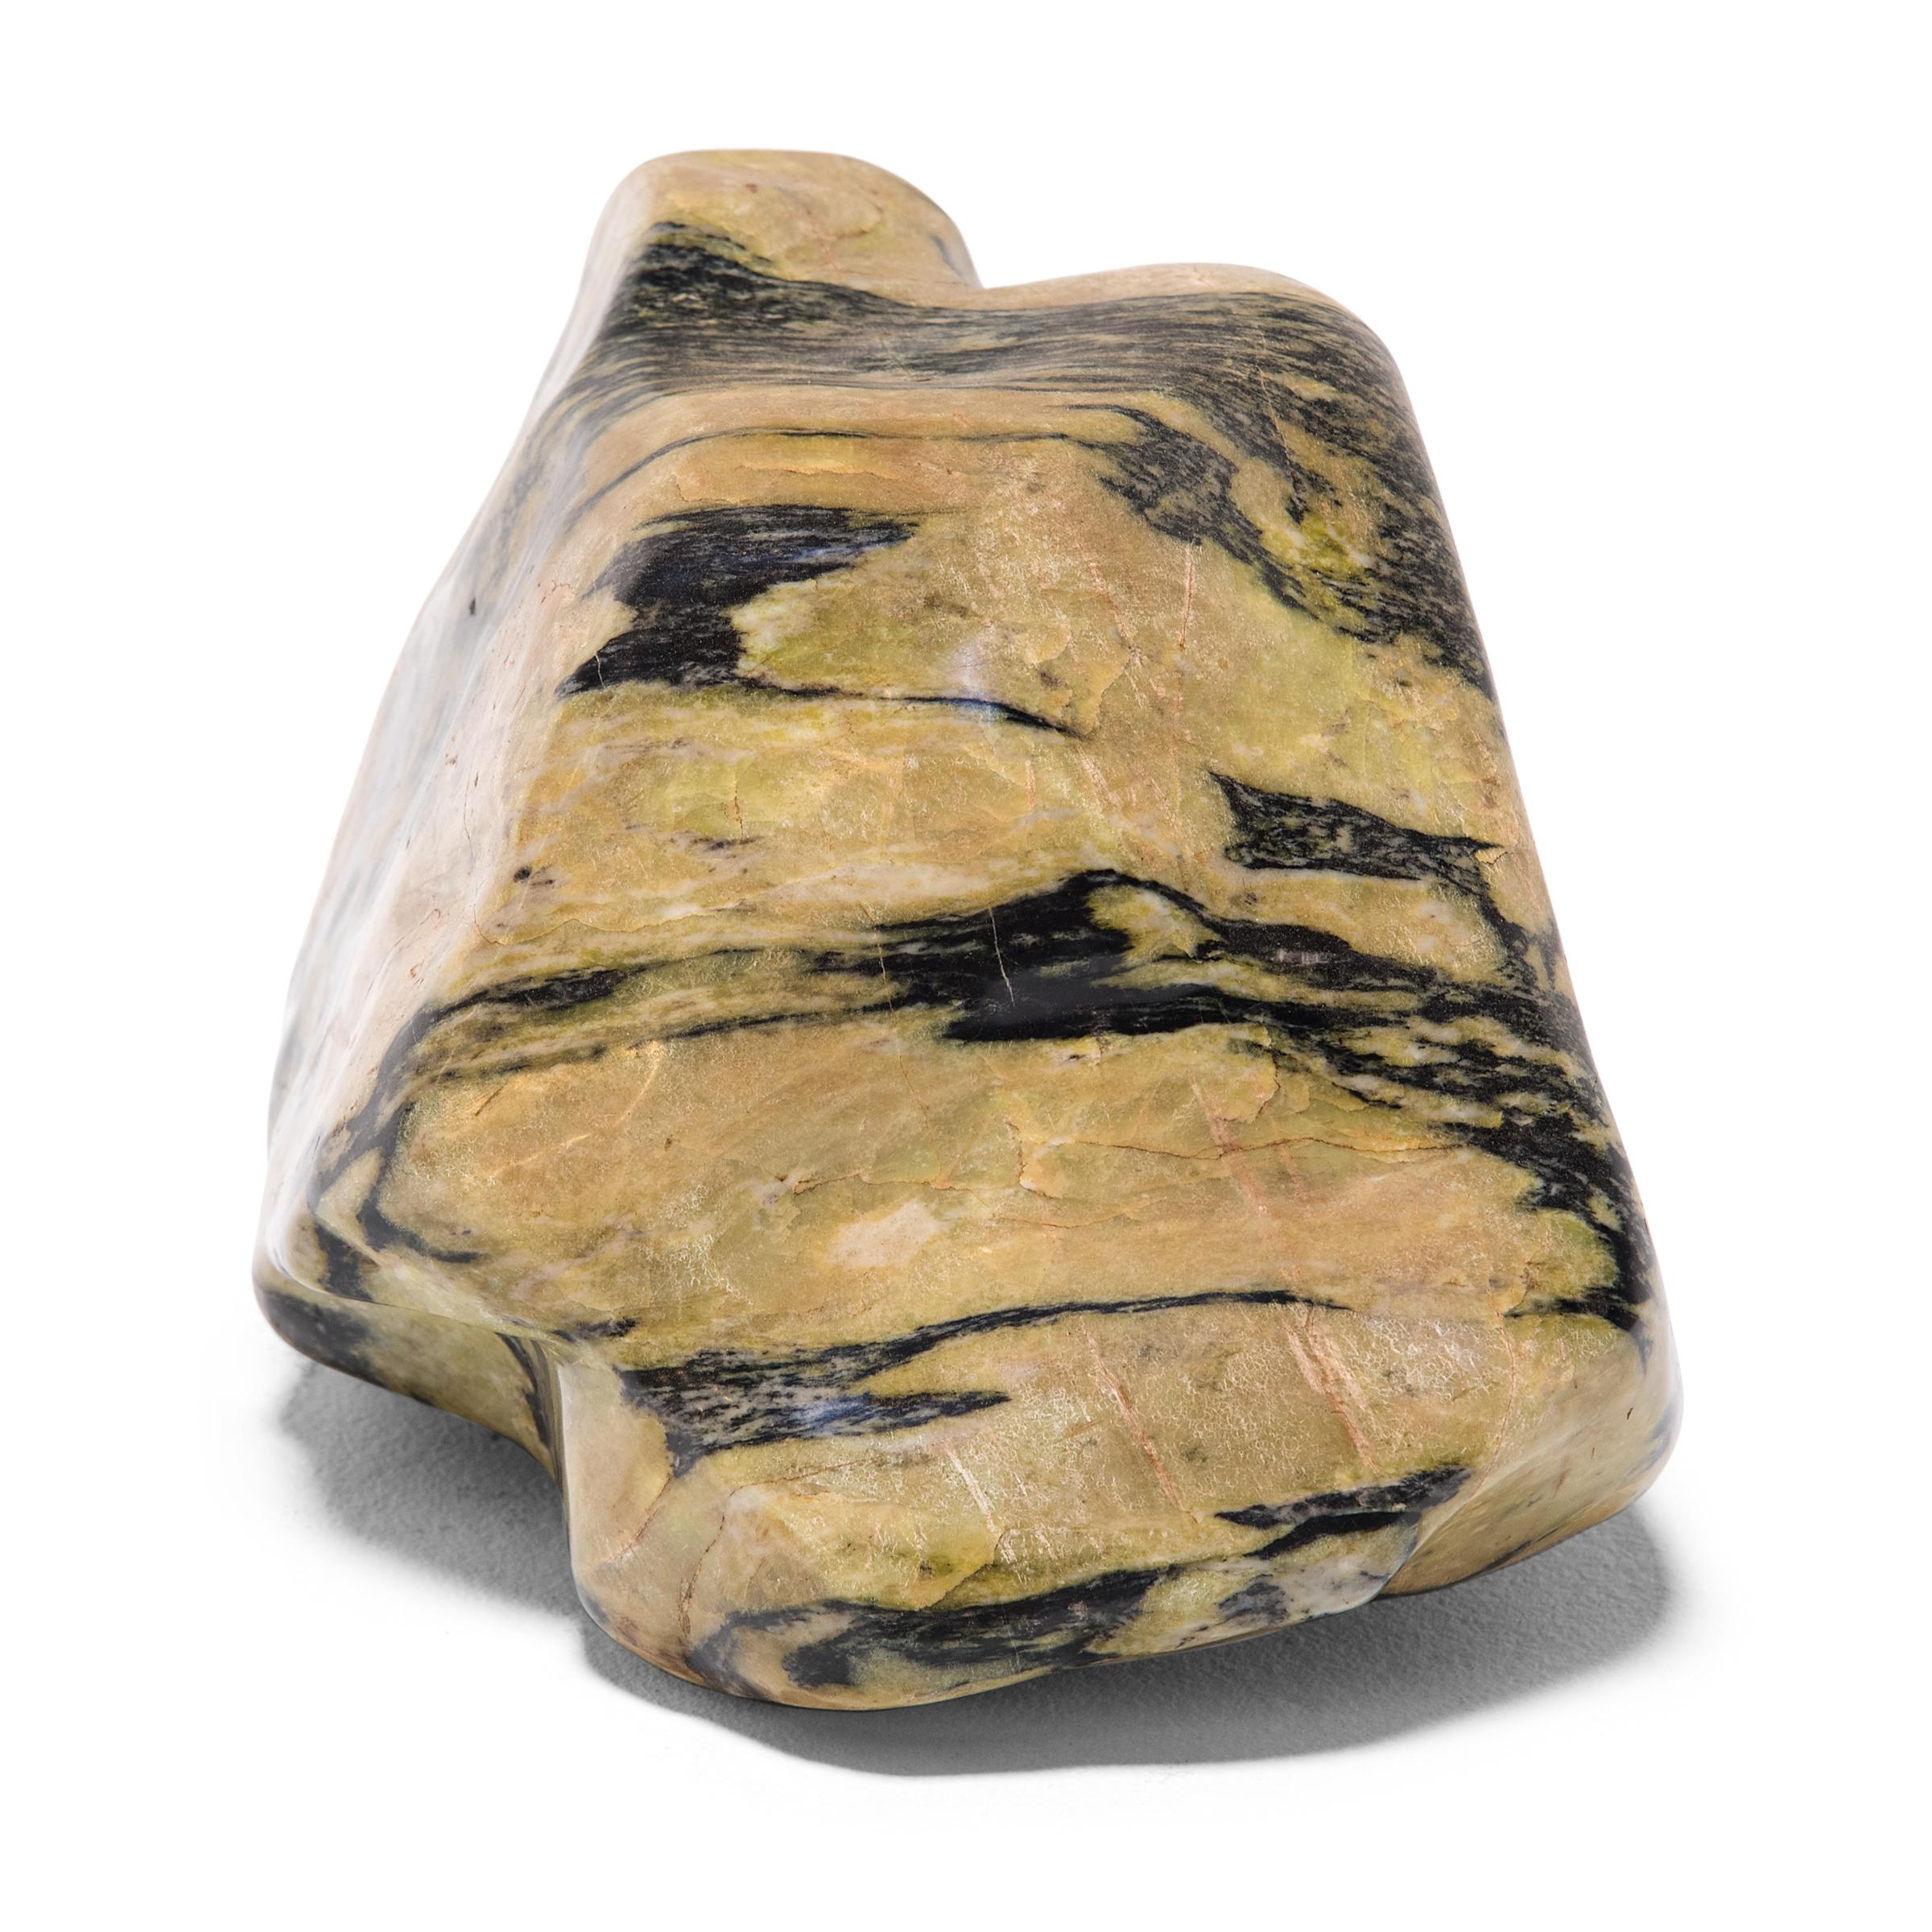 A well-chosen stone is a focal point of both a traditional Chinese garden and a scholar's studio - evoking the complexities of nature and inspiring creative thought. Sourced from China's Dongbei province, this meditation stone has a mesmerizing